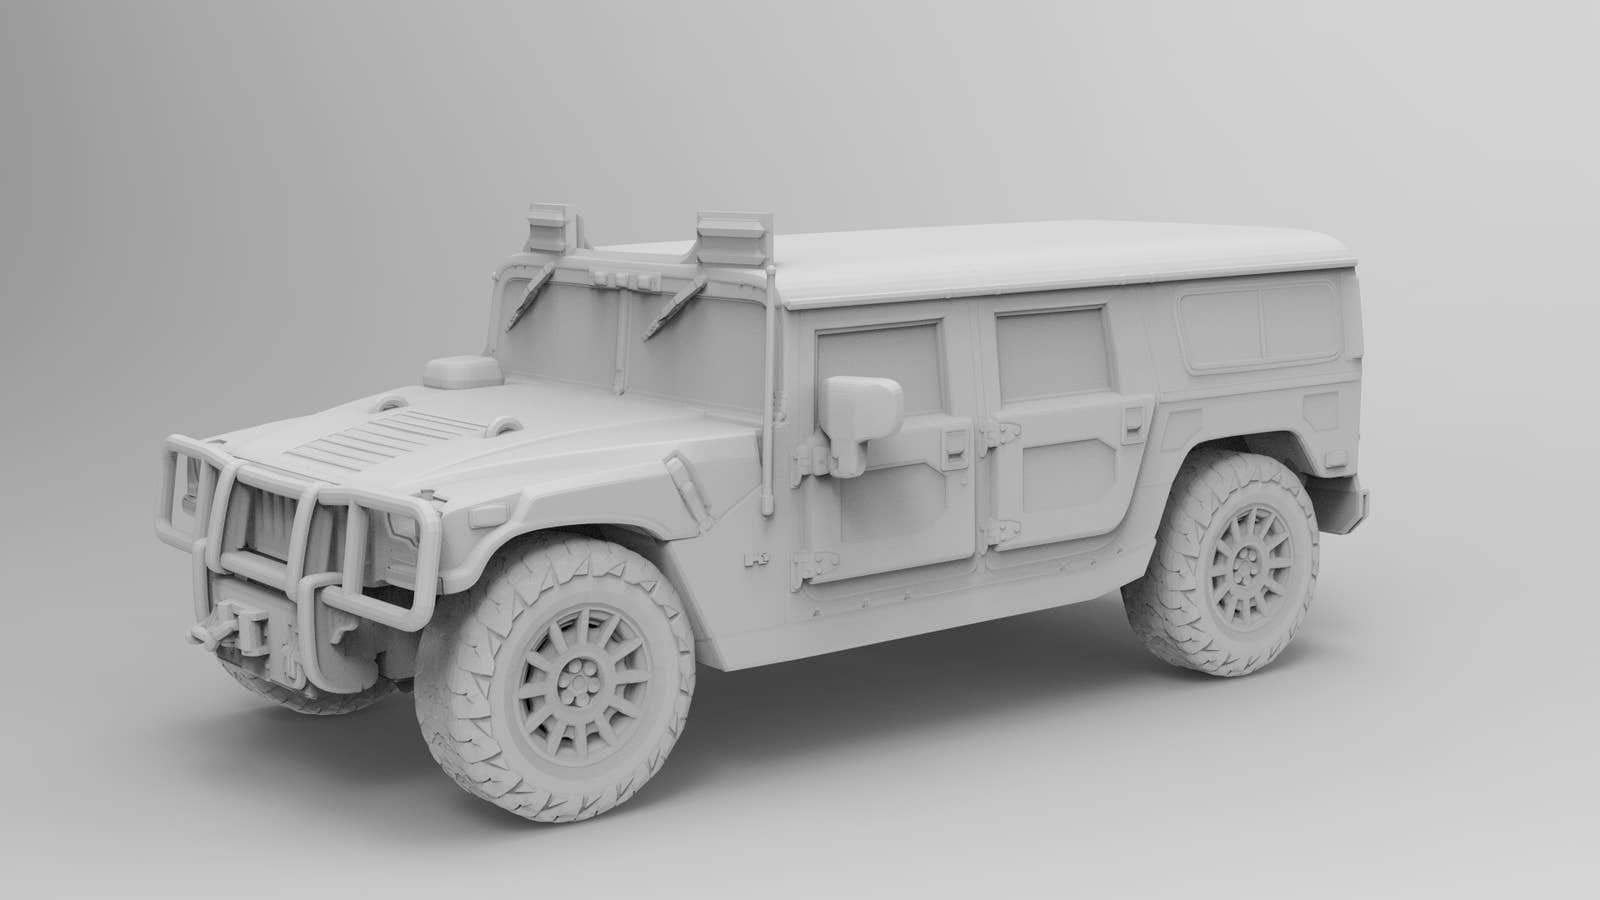 1/87 HO Scale 2006 Hummer H1 Printed in High Resolution pic photo